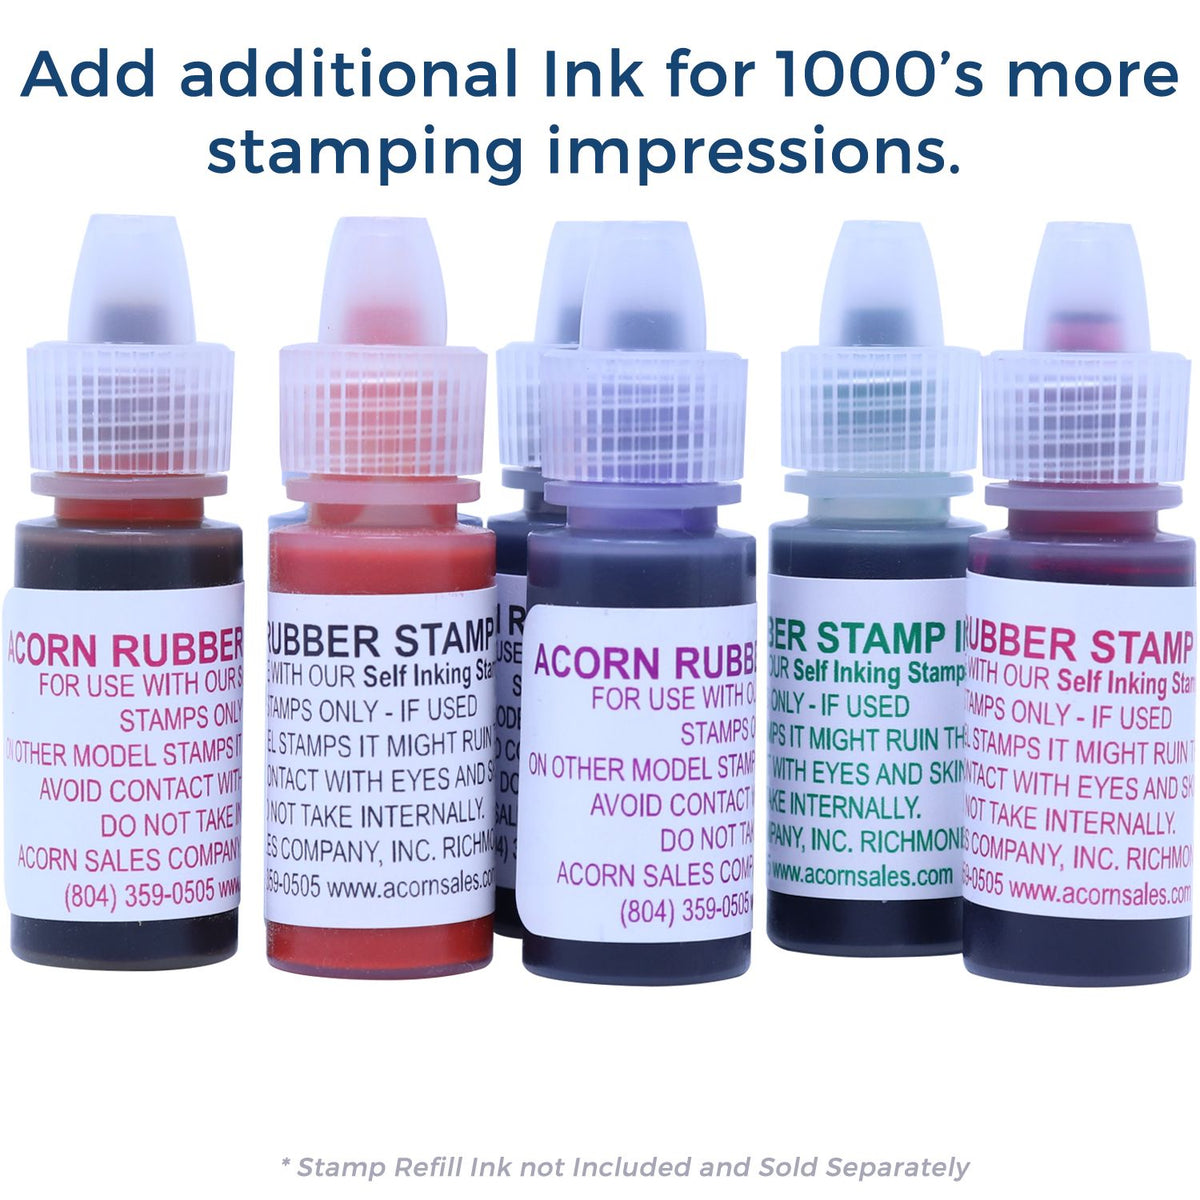 Refill Ink for Self-Inking Round Posted Stamp Available